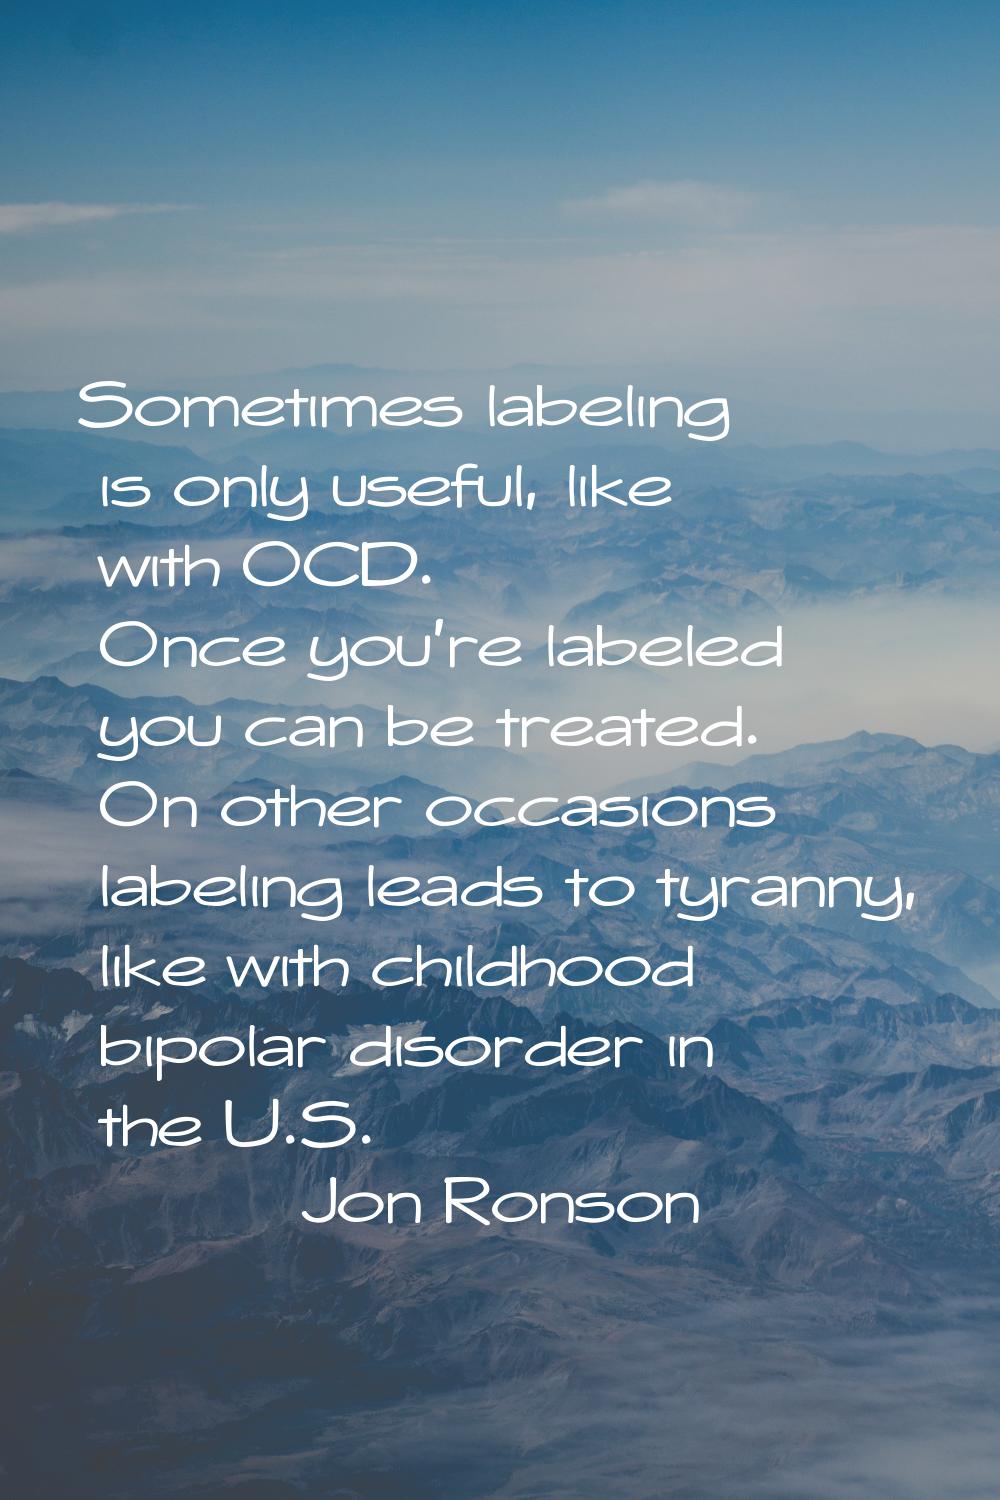 Sometimes labeling is only useful, like with OCD. Once you're labeled you can be treated. On other 